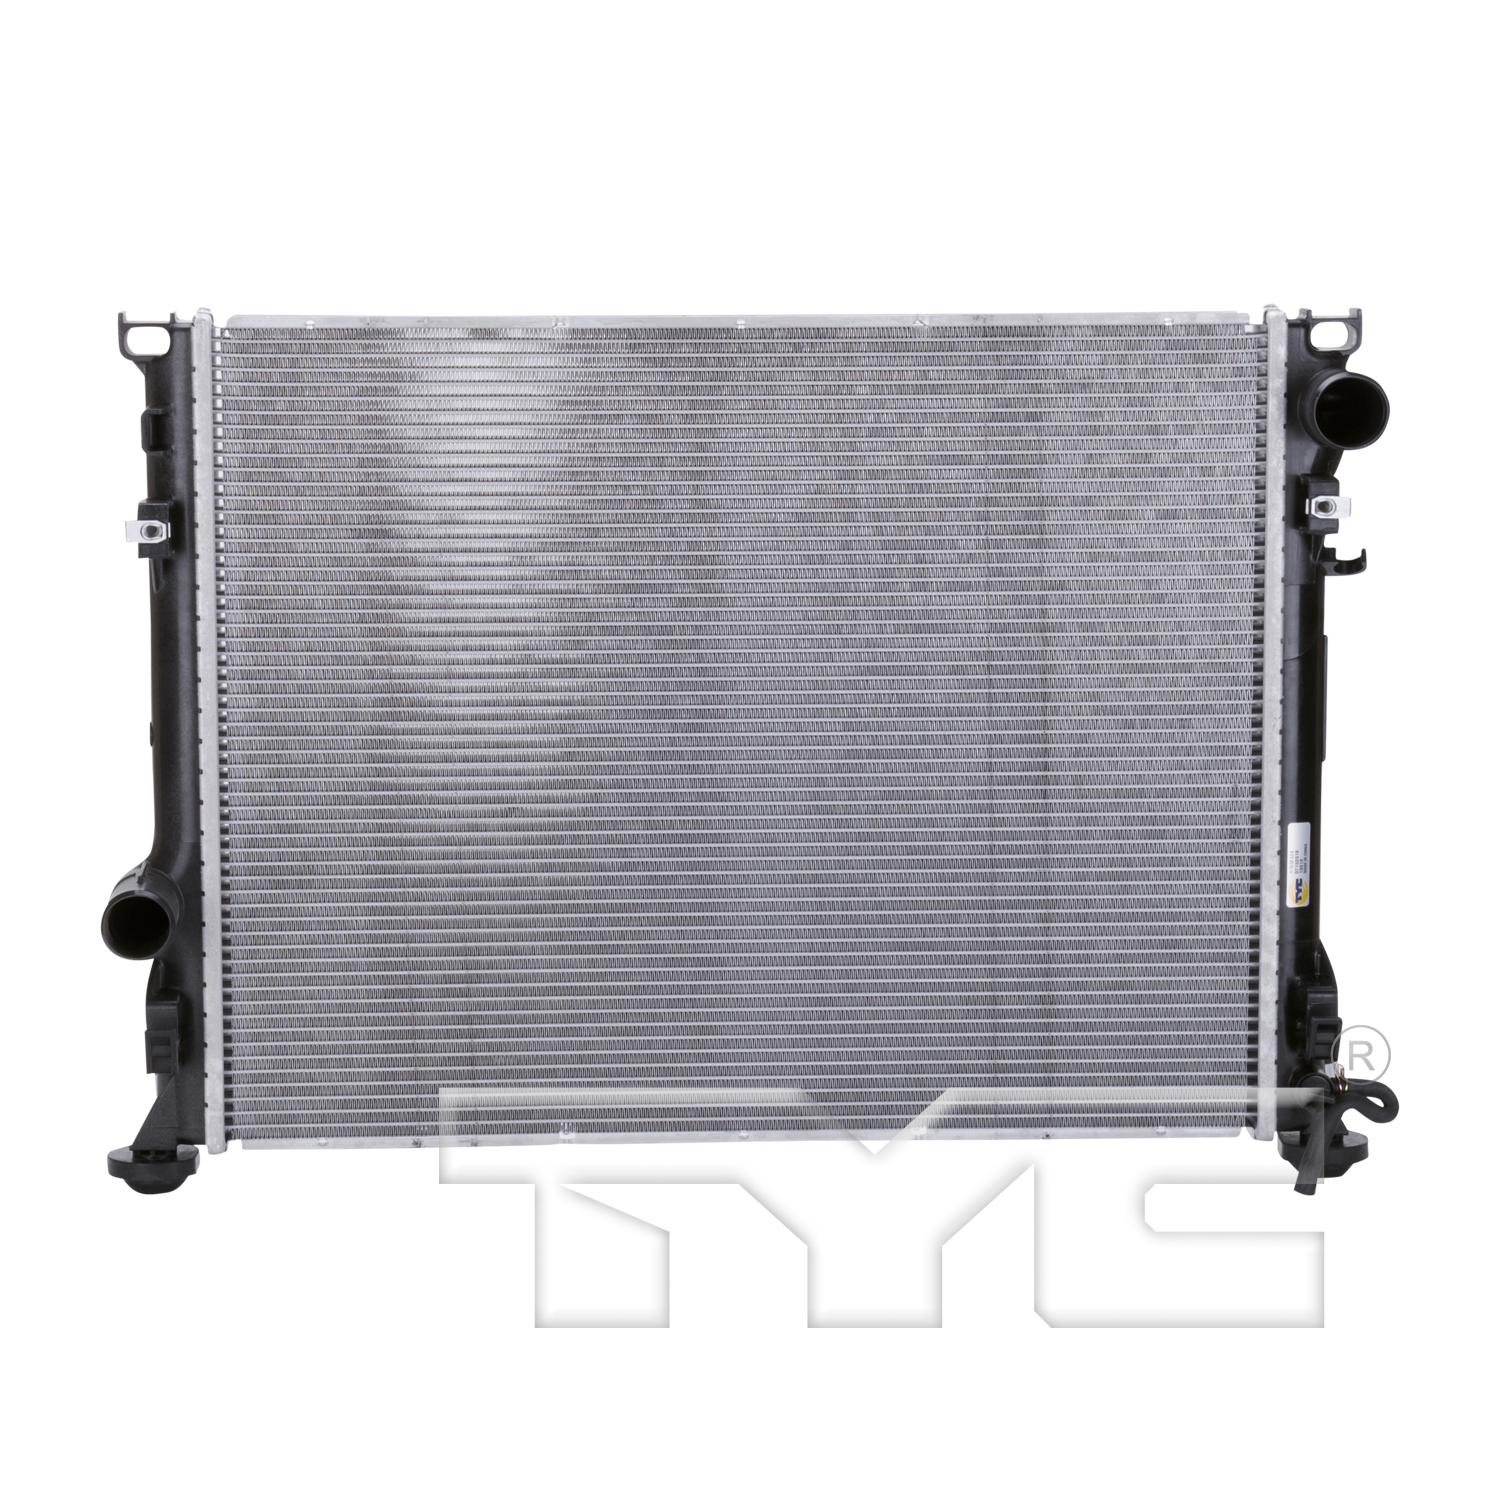 Aftermarket RADIATORS for DODGE - CHARGER, CHARGER,06-08,Radiator assembly